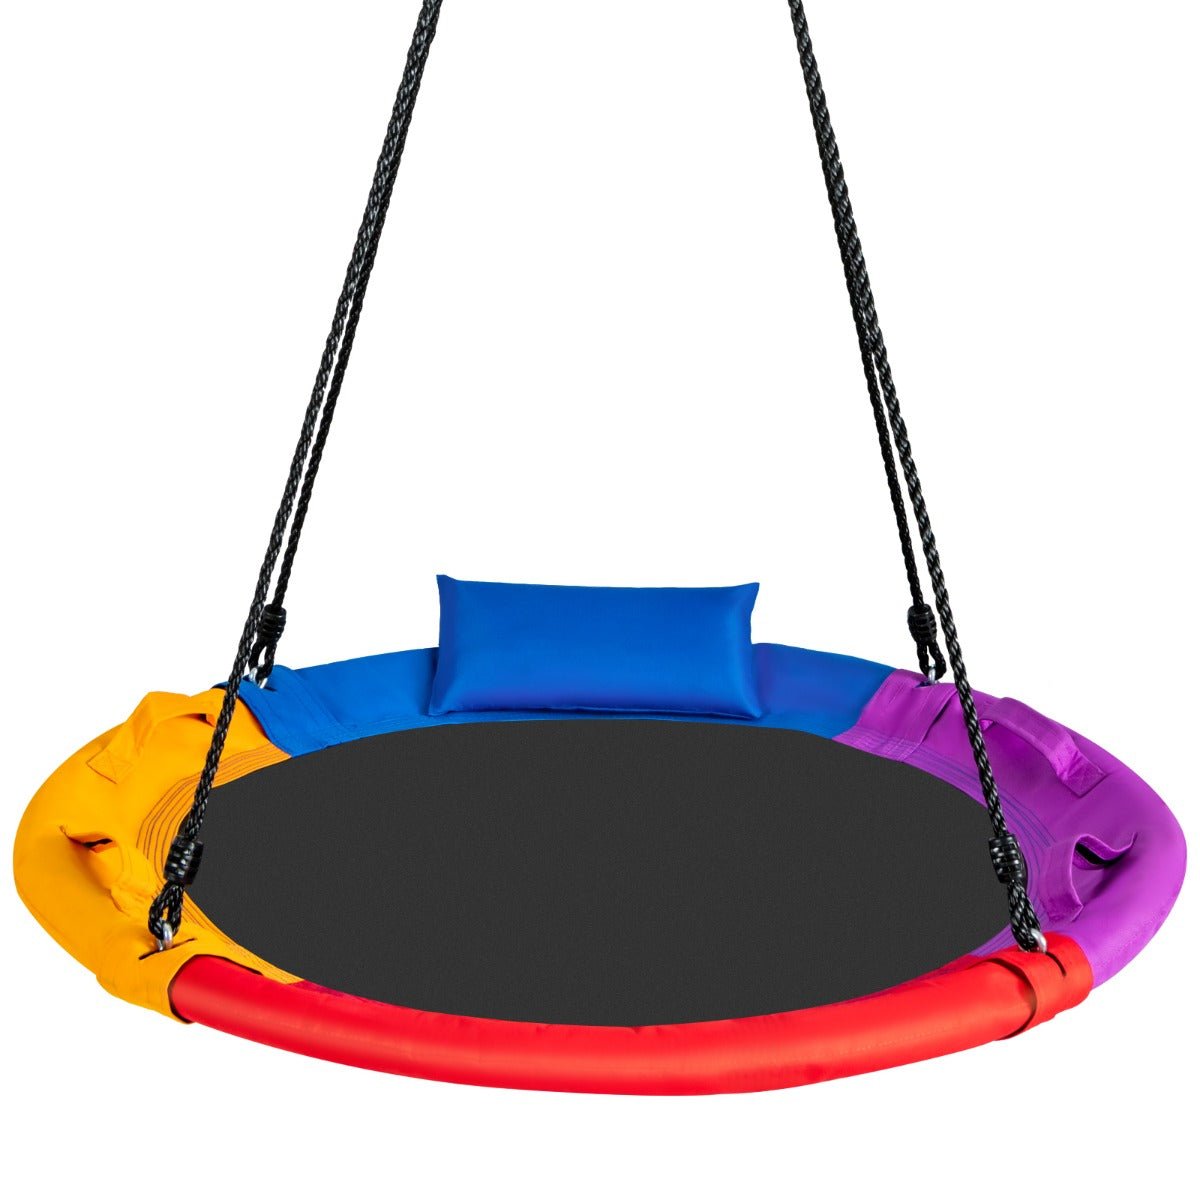 Vibrant Round Saucer Tree Swing: Outdoor Fun with Comfy Pillow for Kids